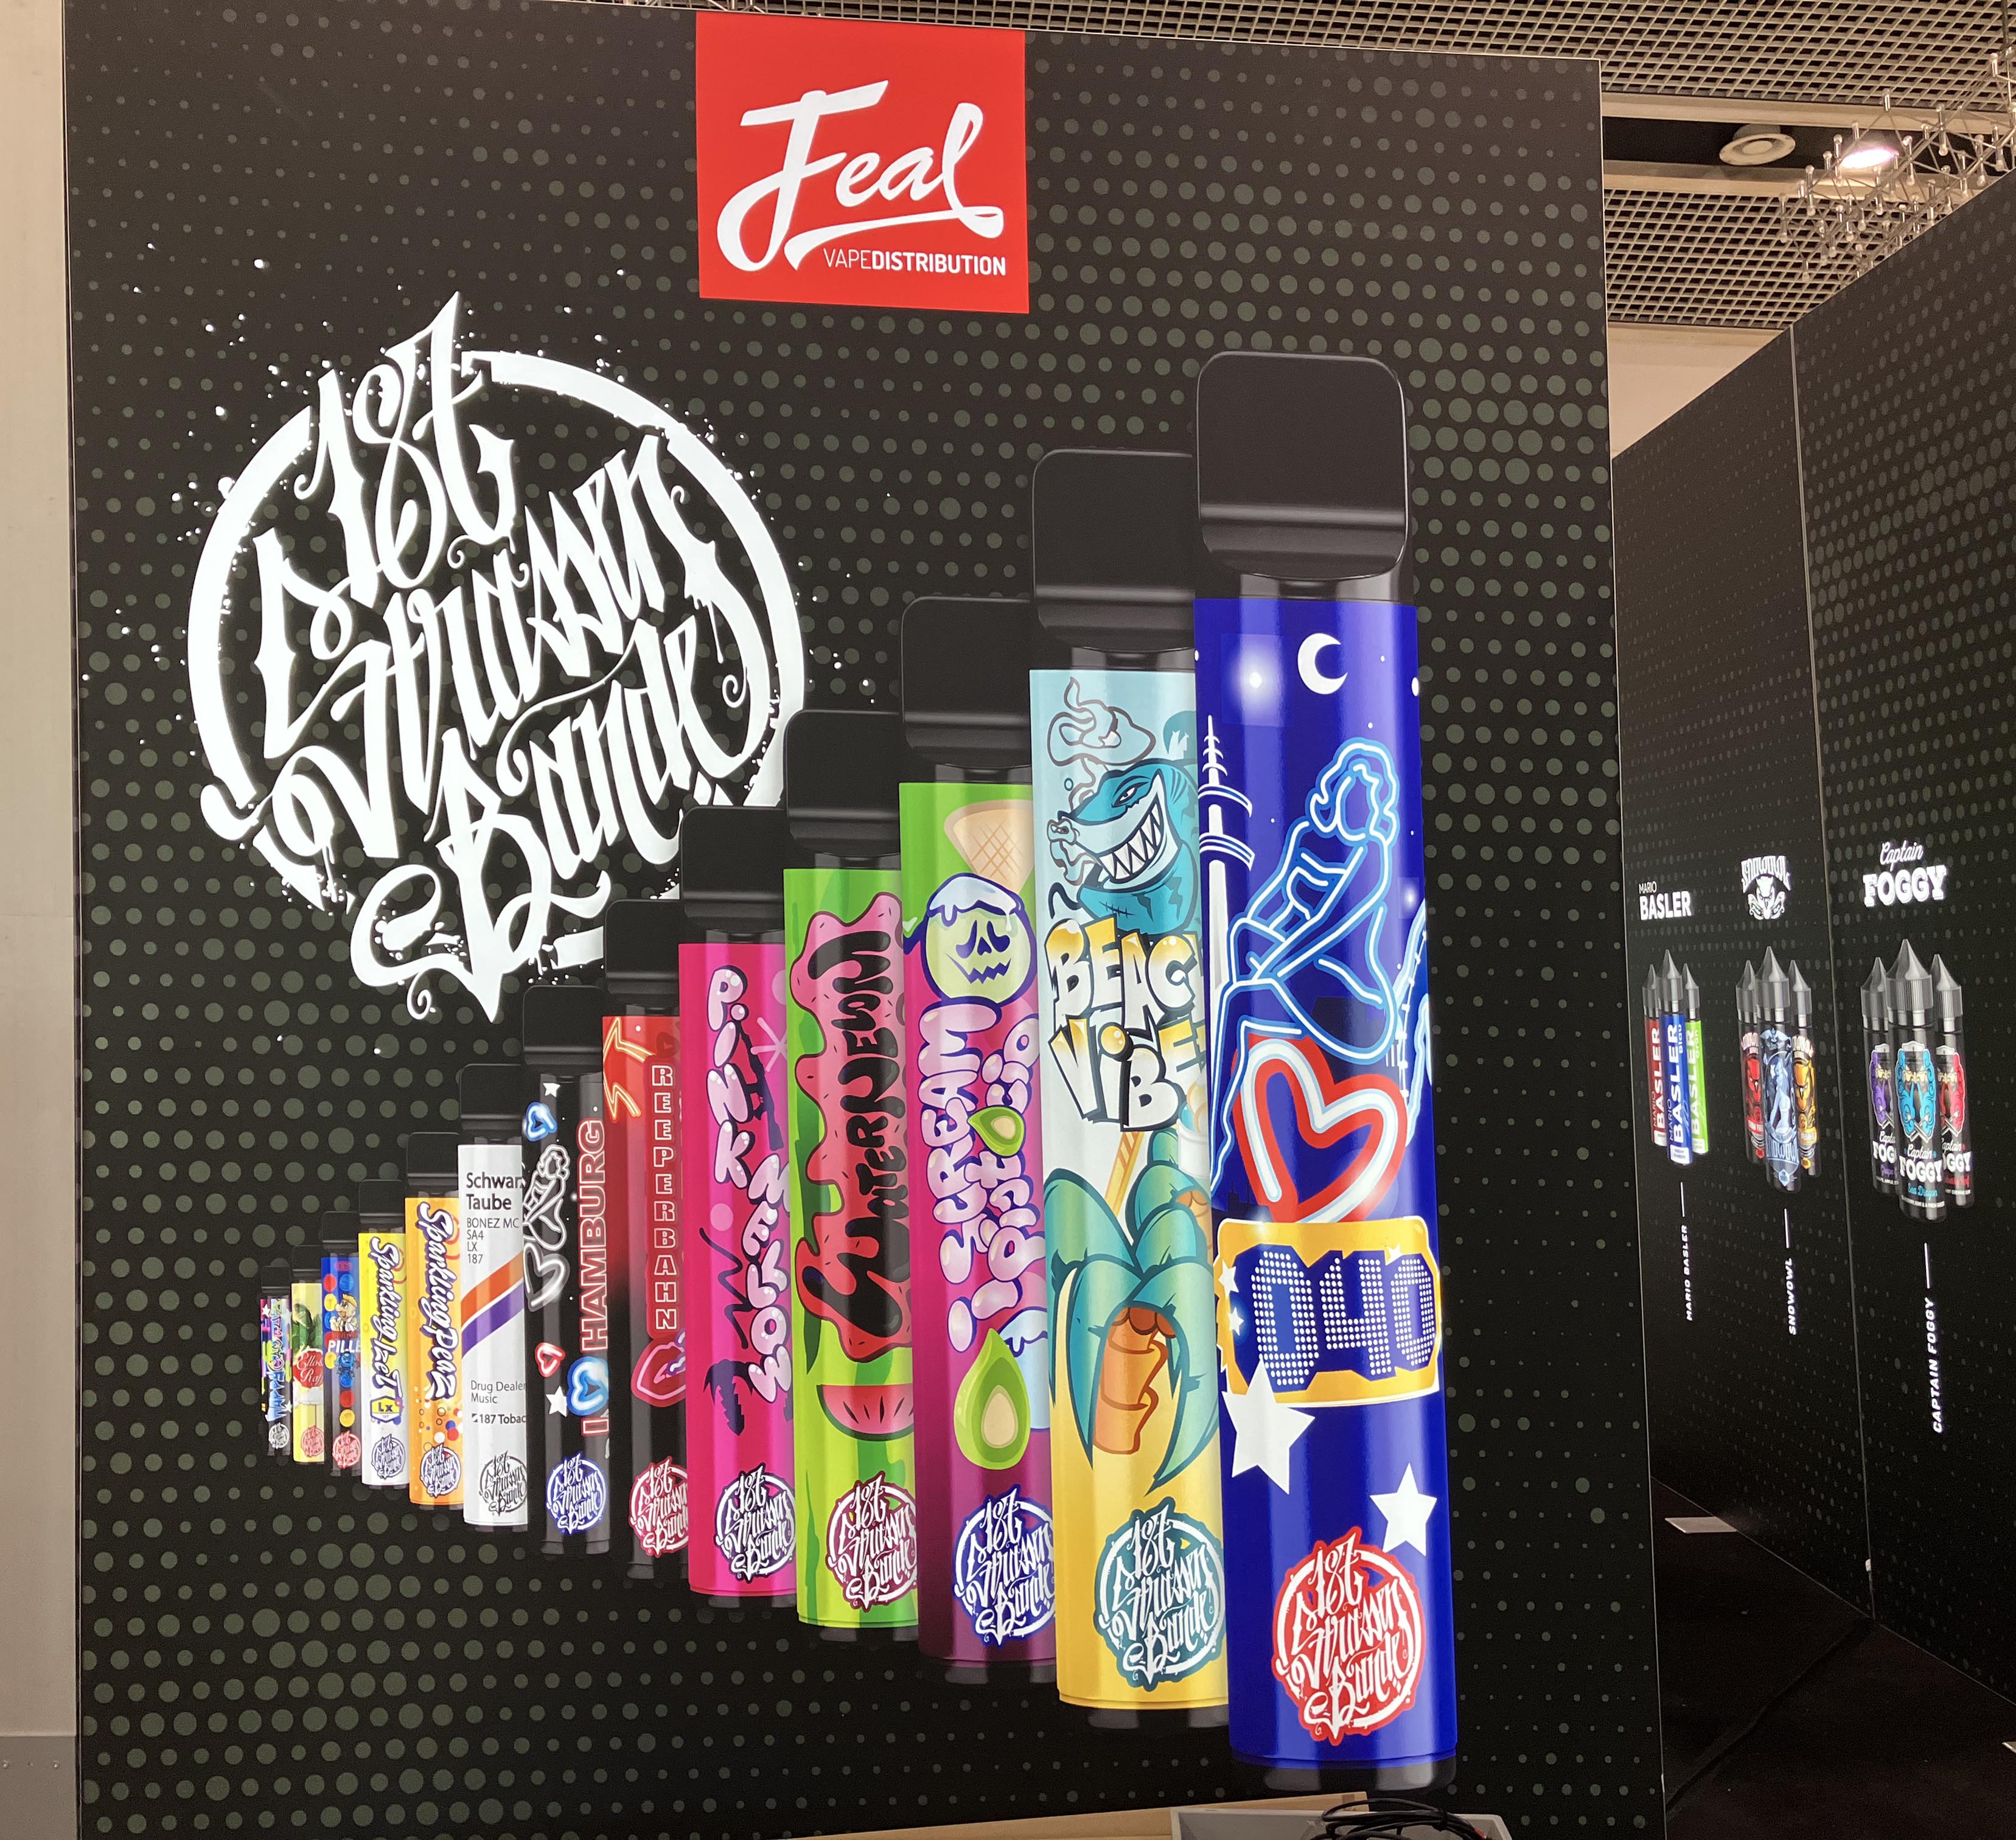 Get A Sneak Peek! Three Major German Merchants Display Well-Known Chinese E-Cigarette Brands At Their Booths.